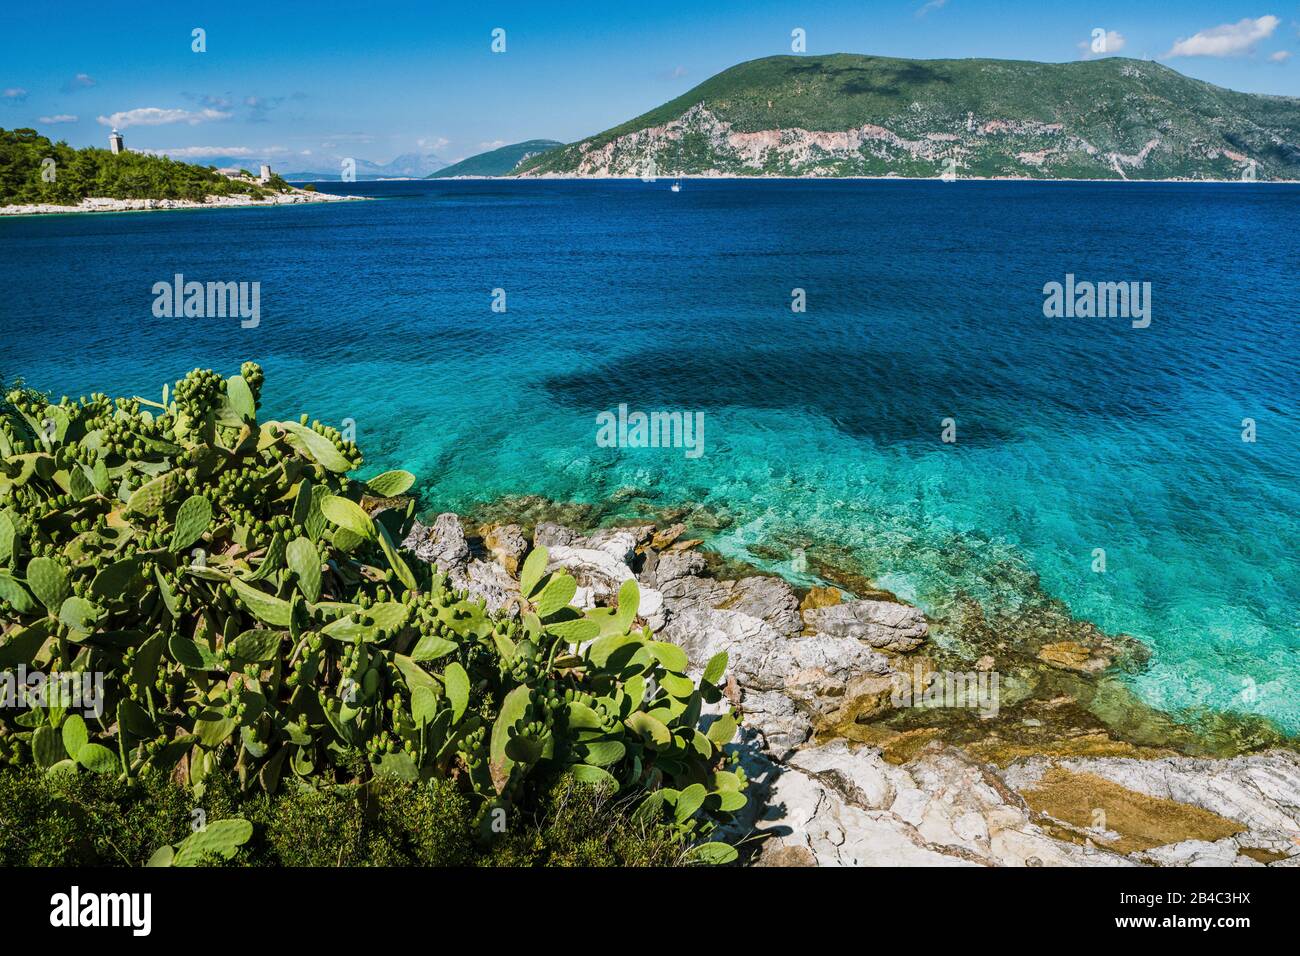 panorama of crystal clear transparent blue turquoise teal Mediterranean seascape in Fiskardo town. Kefalonia, Ionian islands, Greece. Stock Photo